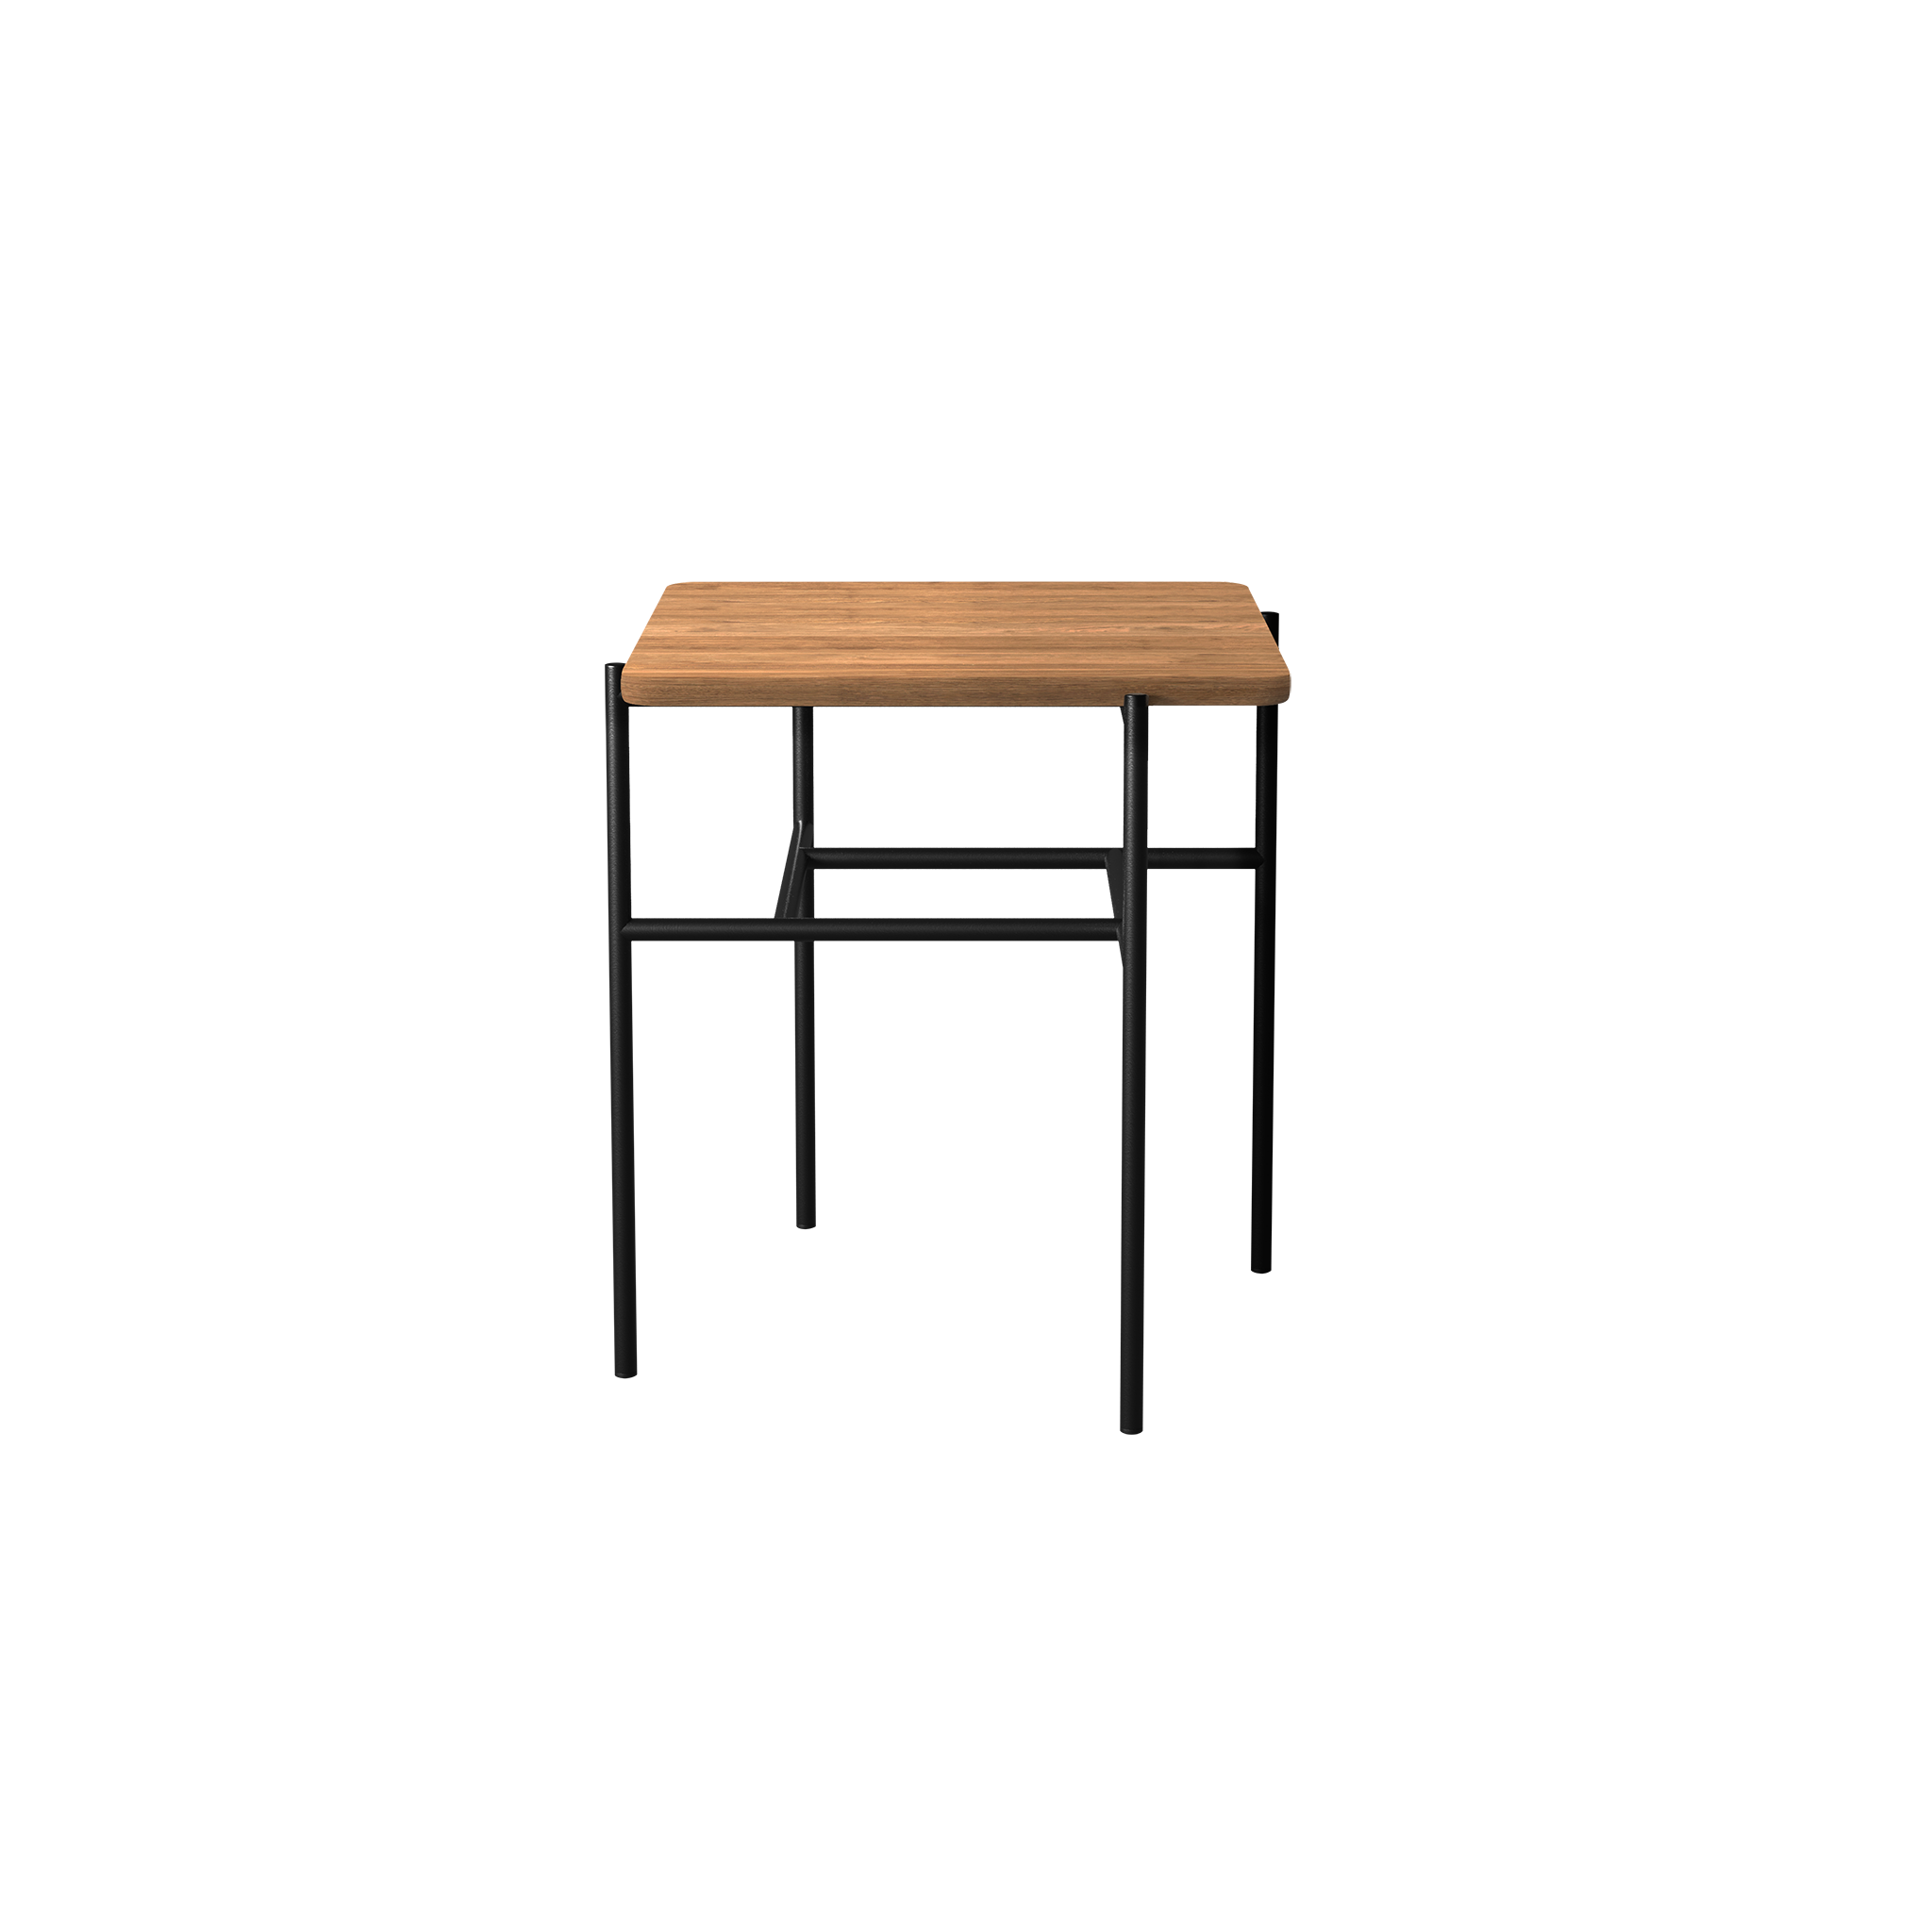 WOOD Side Table 43x43x50 WOOD Side Table 43x43x50 Bruunmunch Furniture